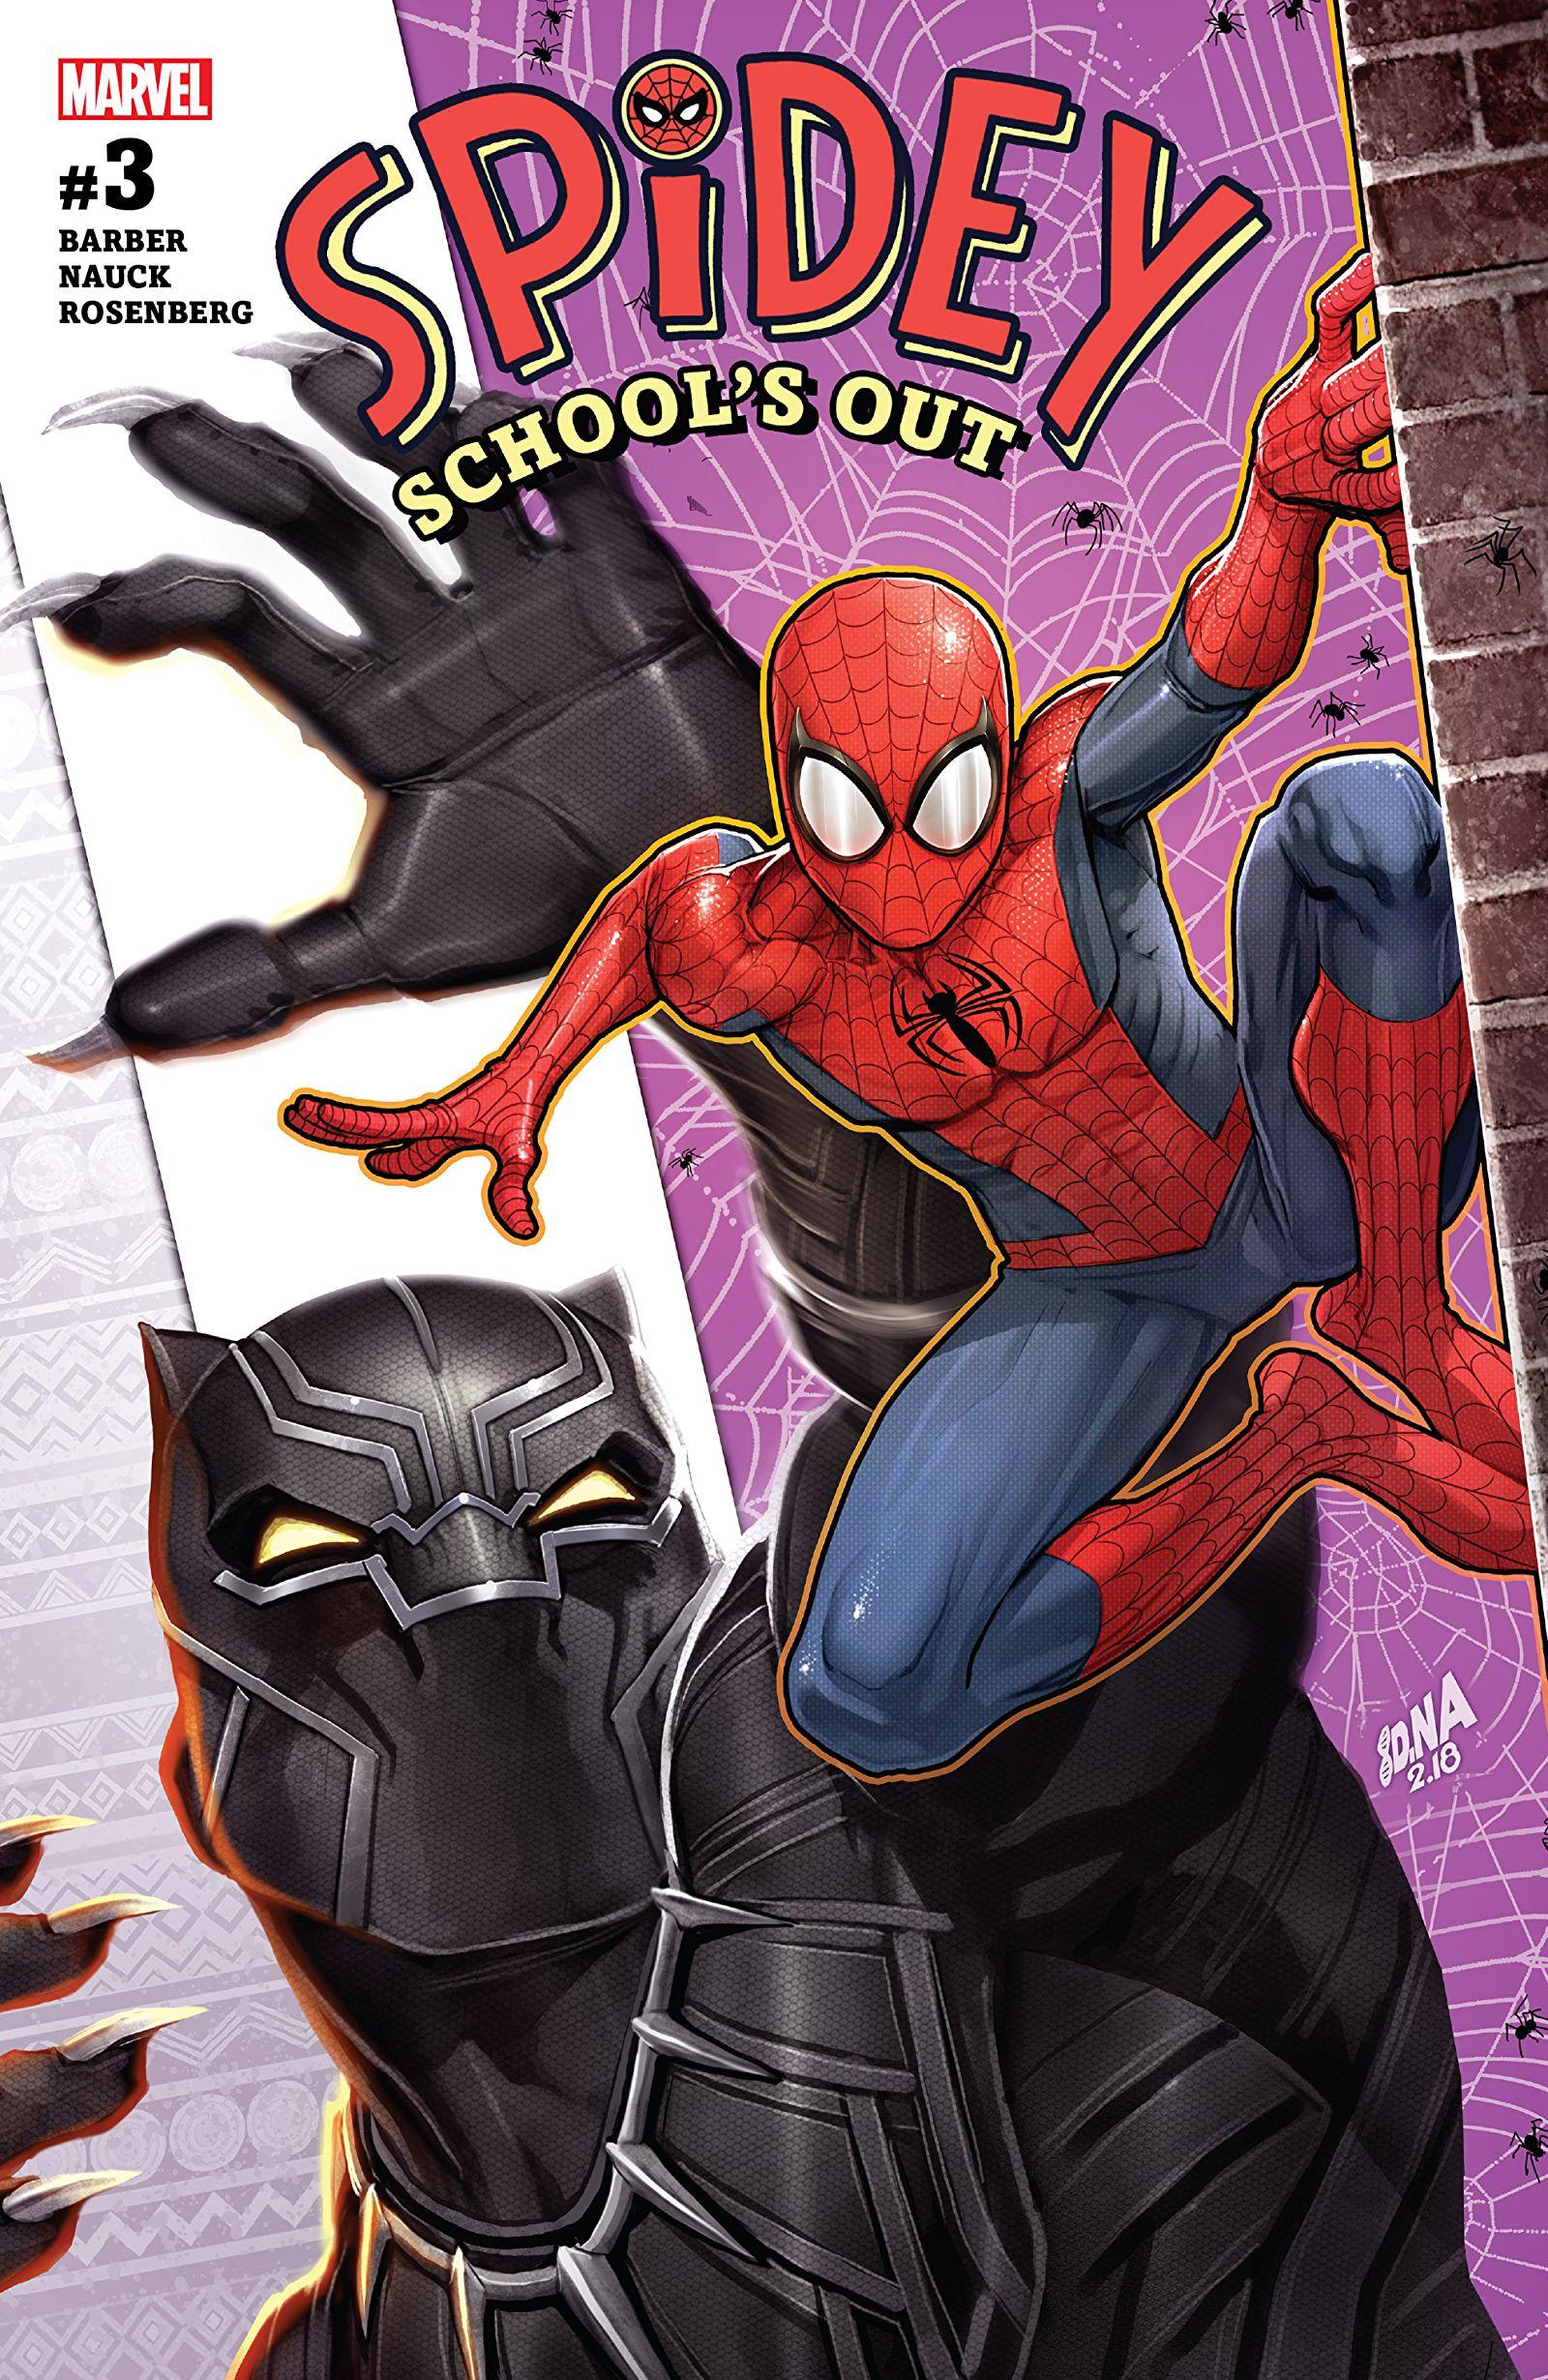 Spidey: School's Out Vol. 1 #3